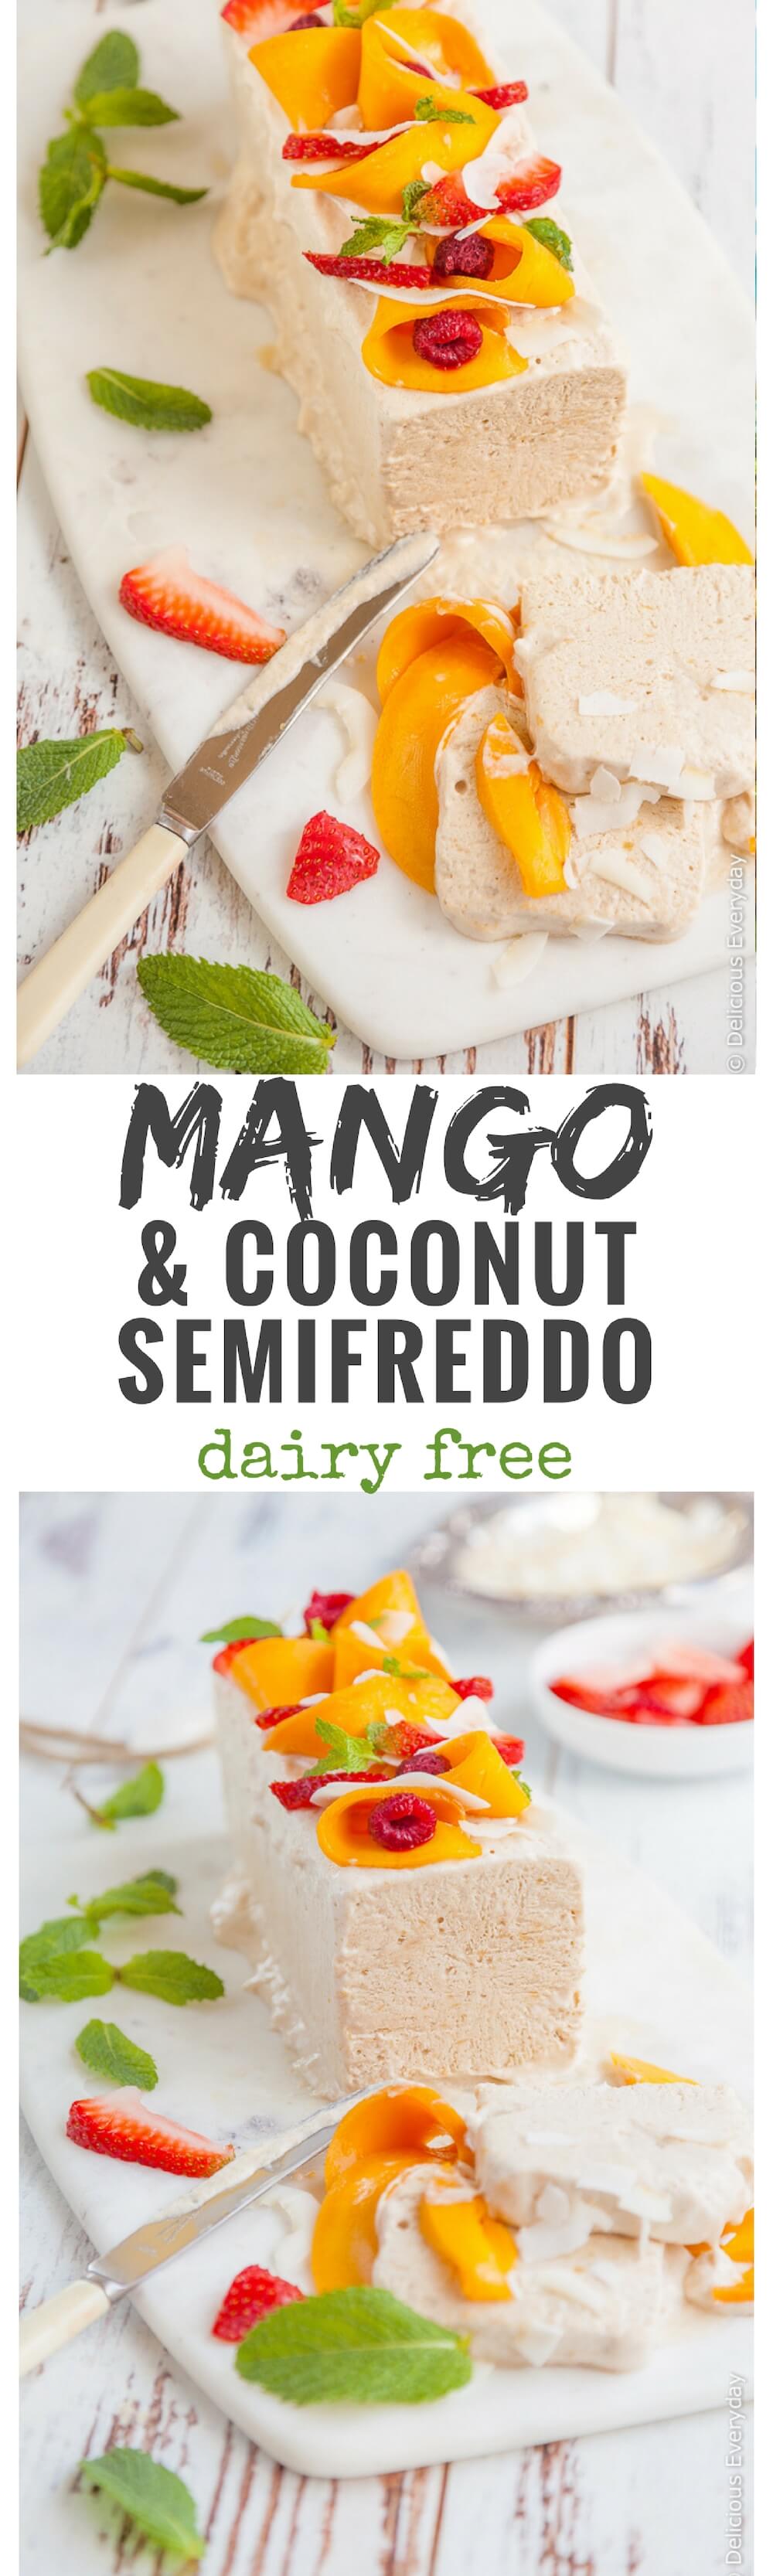 This gorgeous mango and coconut semifreddo recipe combines the best of elements of summer. And it also just happens to be dairy free and refined sugar free!